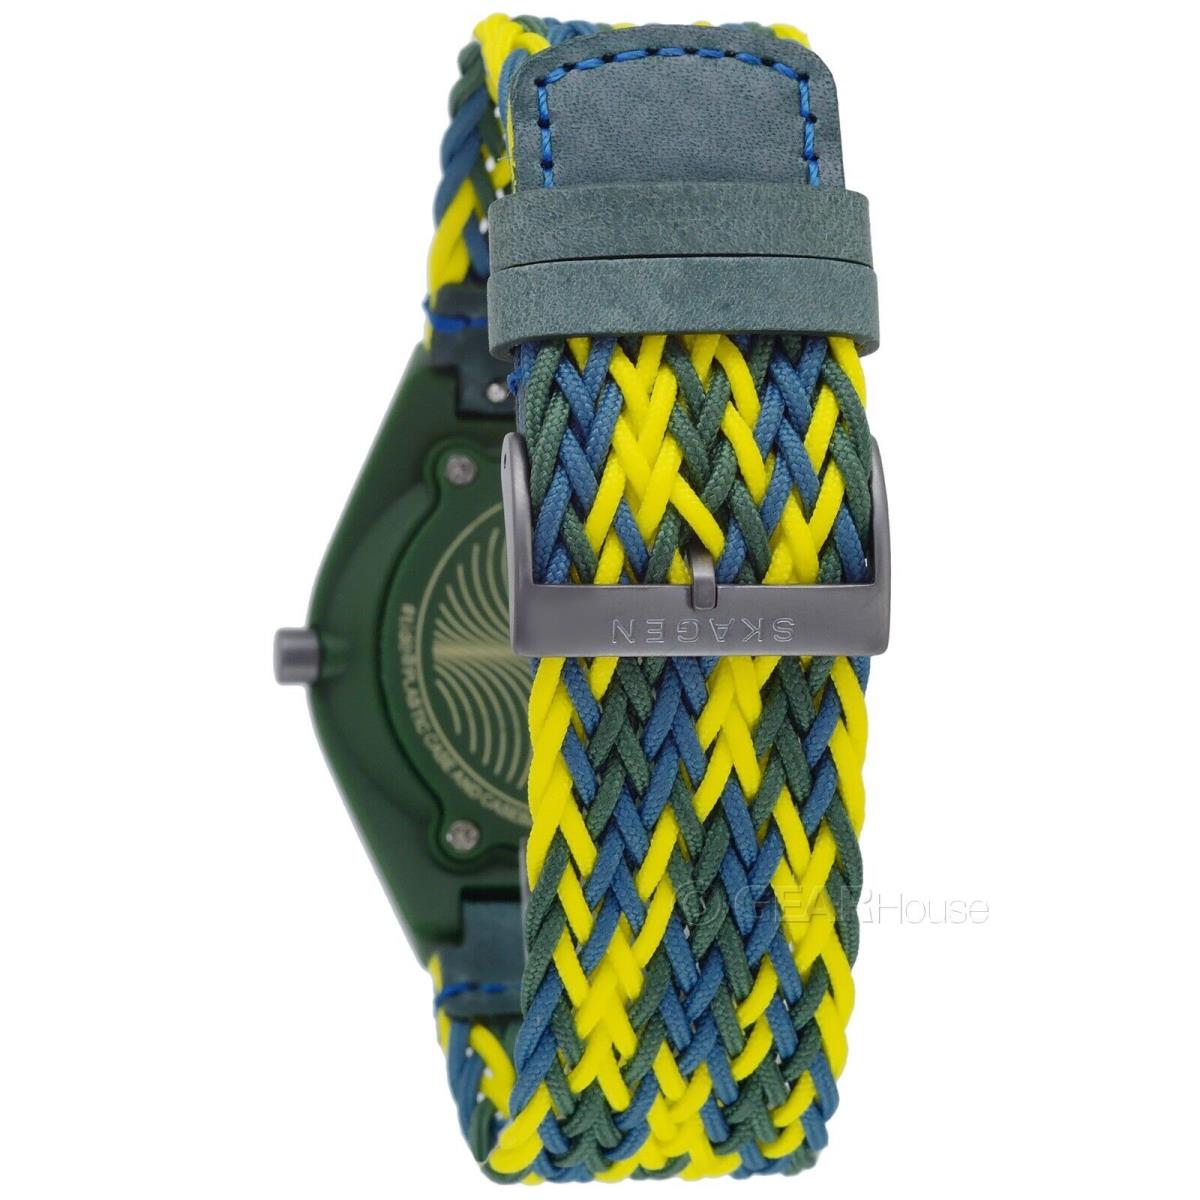 Skagen Samso Series Mens Solar Powered Watch Green Yellow Braided Band Recycled